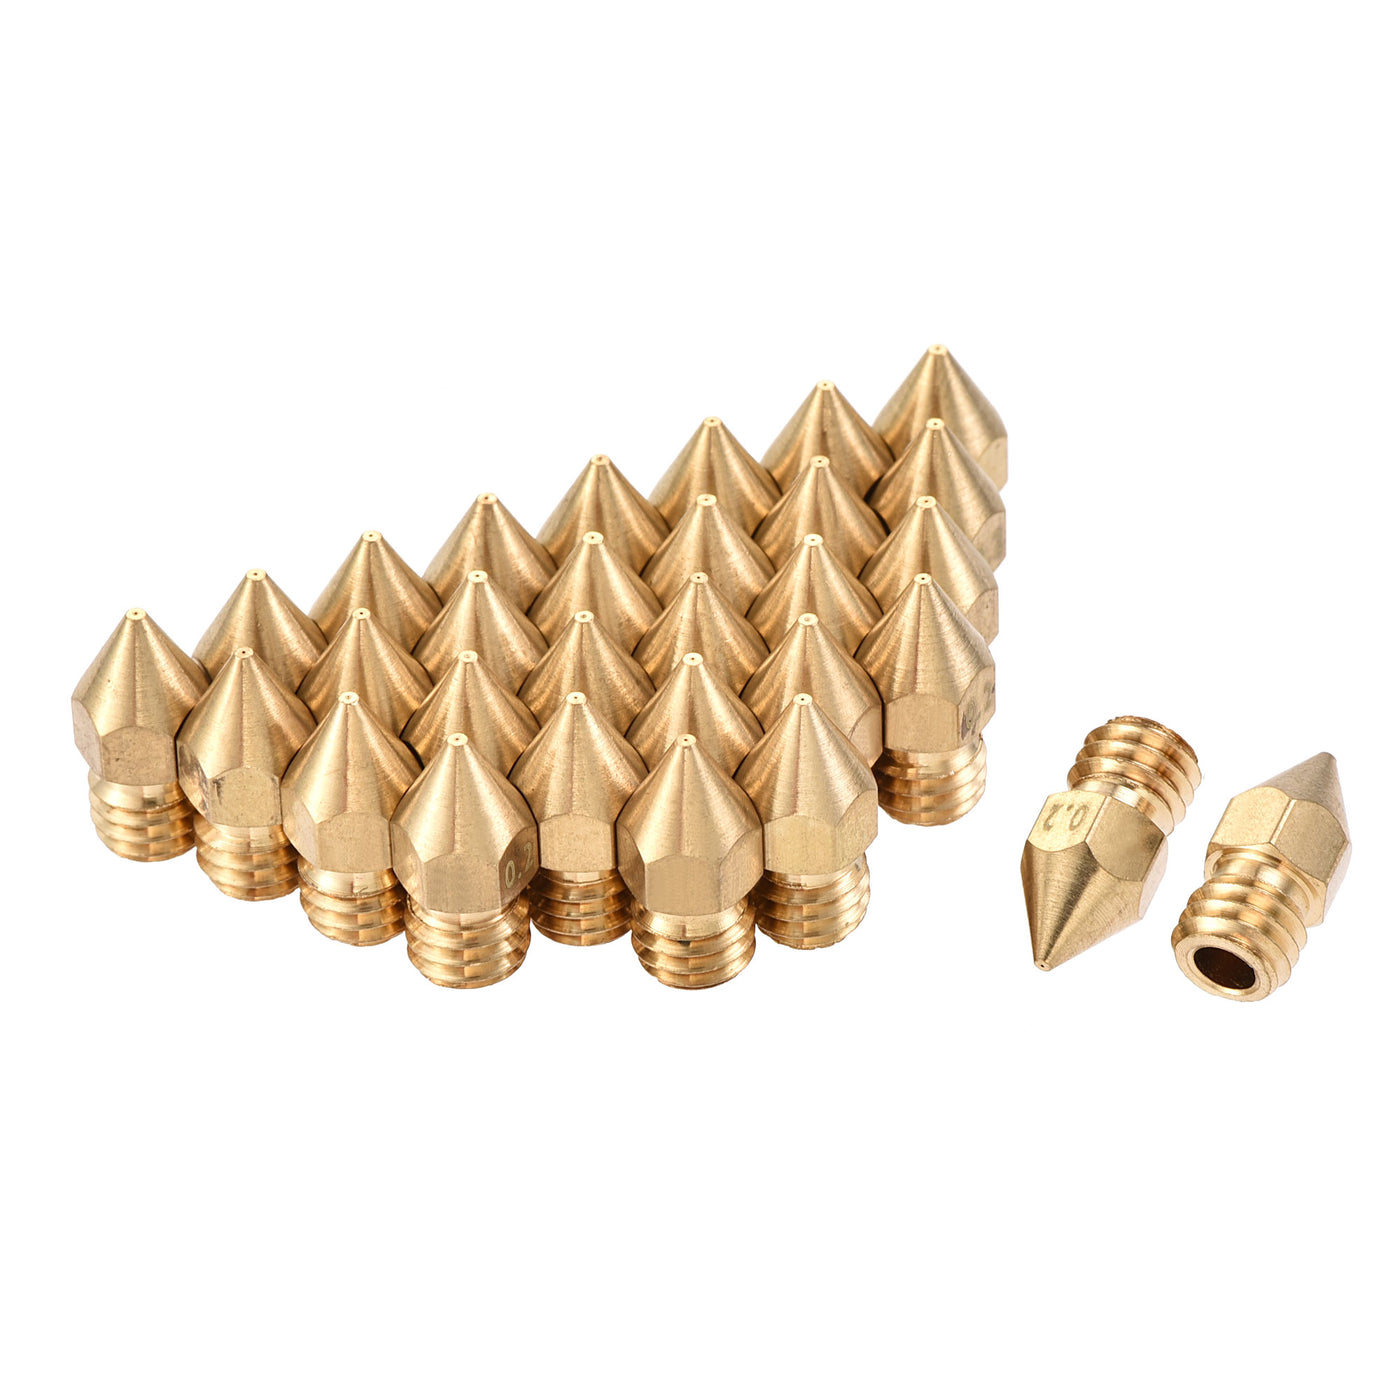 uxcell Uxcell 0.2mm 3D Printer Nozzle, 30pcs M6 Thread for MK8 3mm Extruder Print, Brass